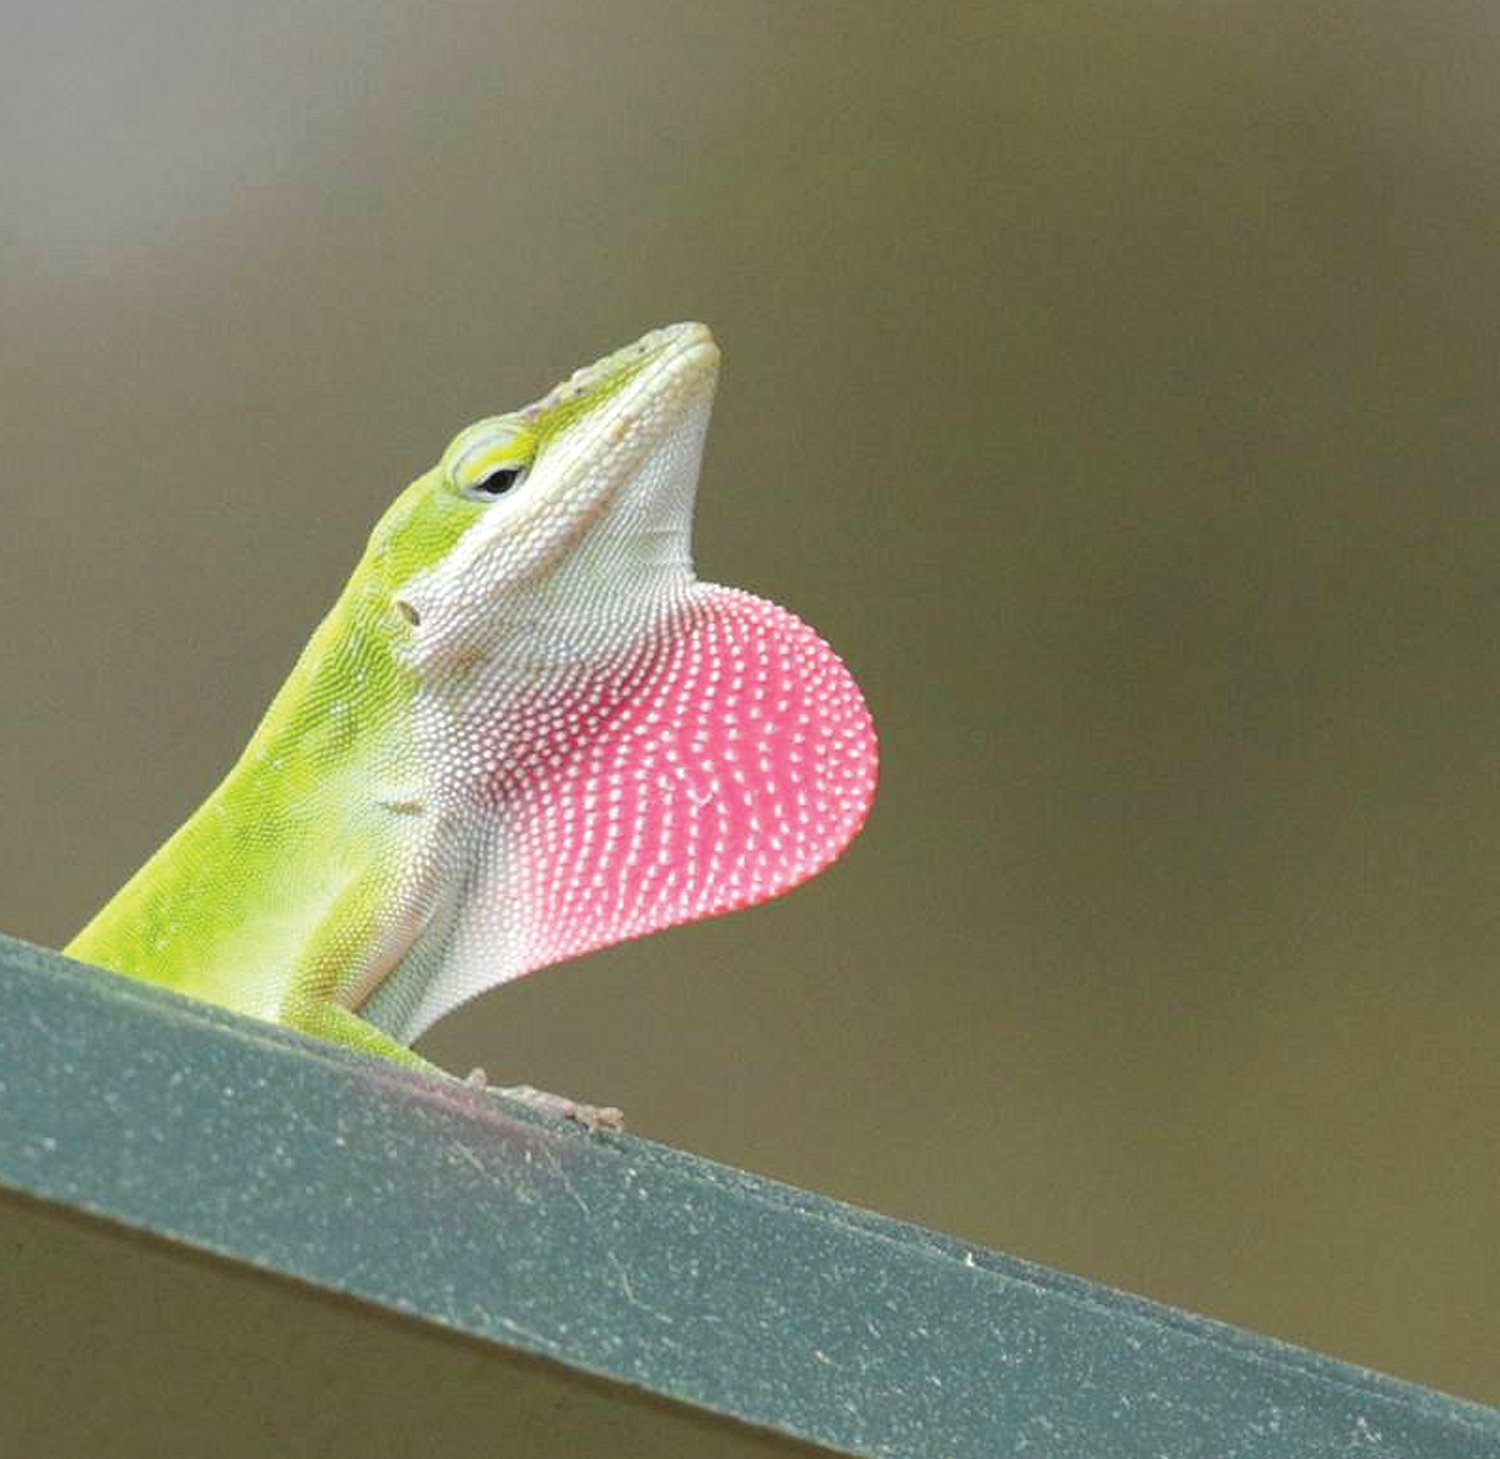 A green anole lizard displays his bright pink throat.